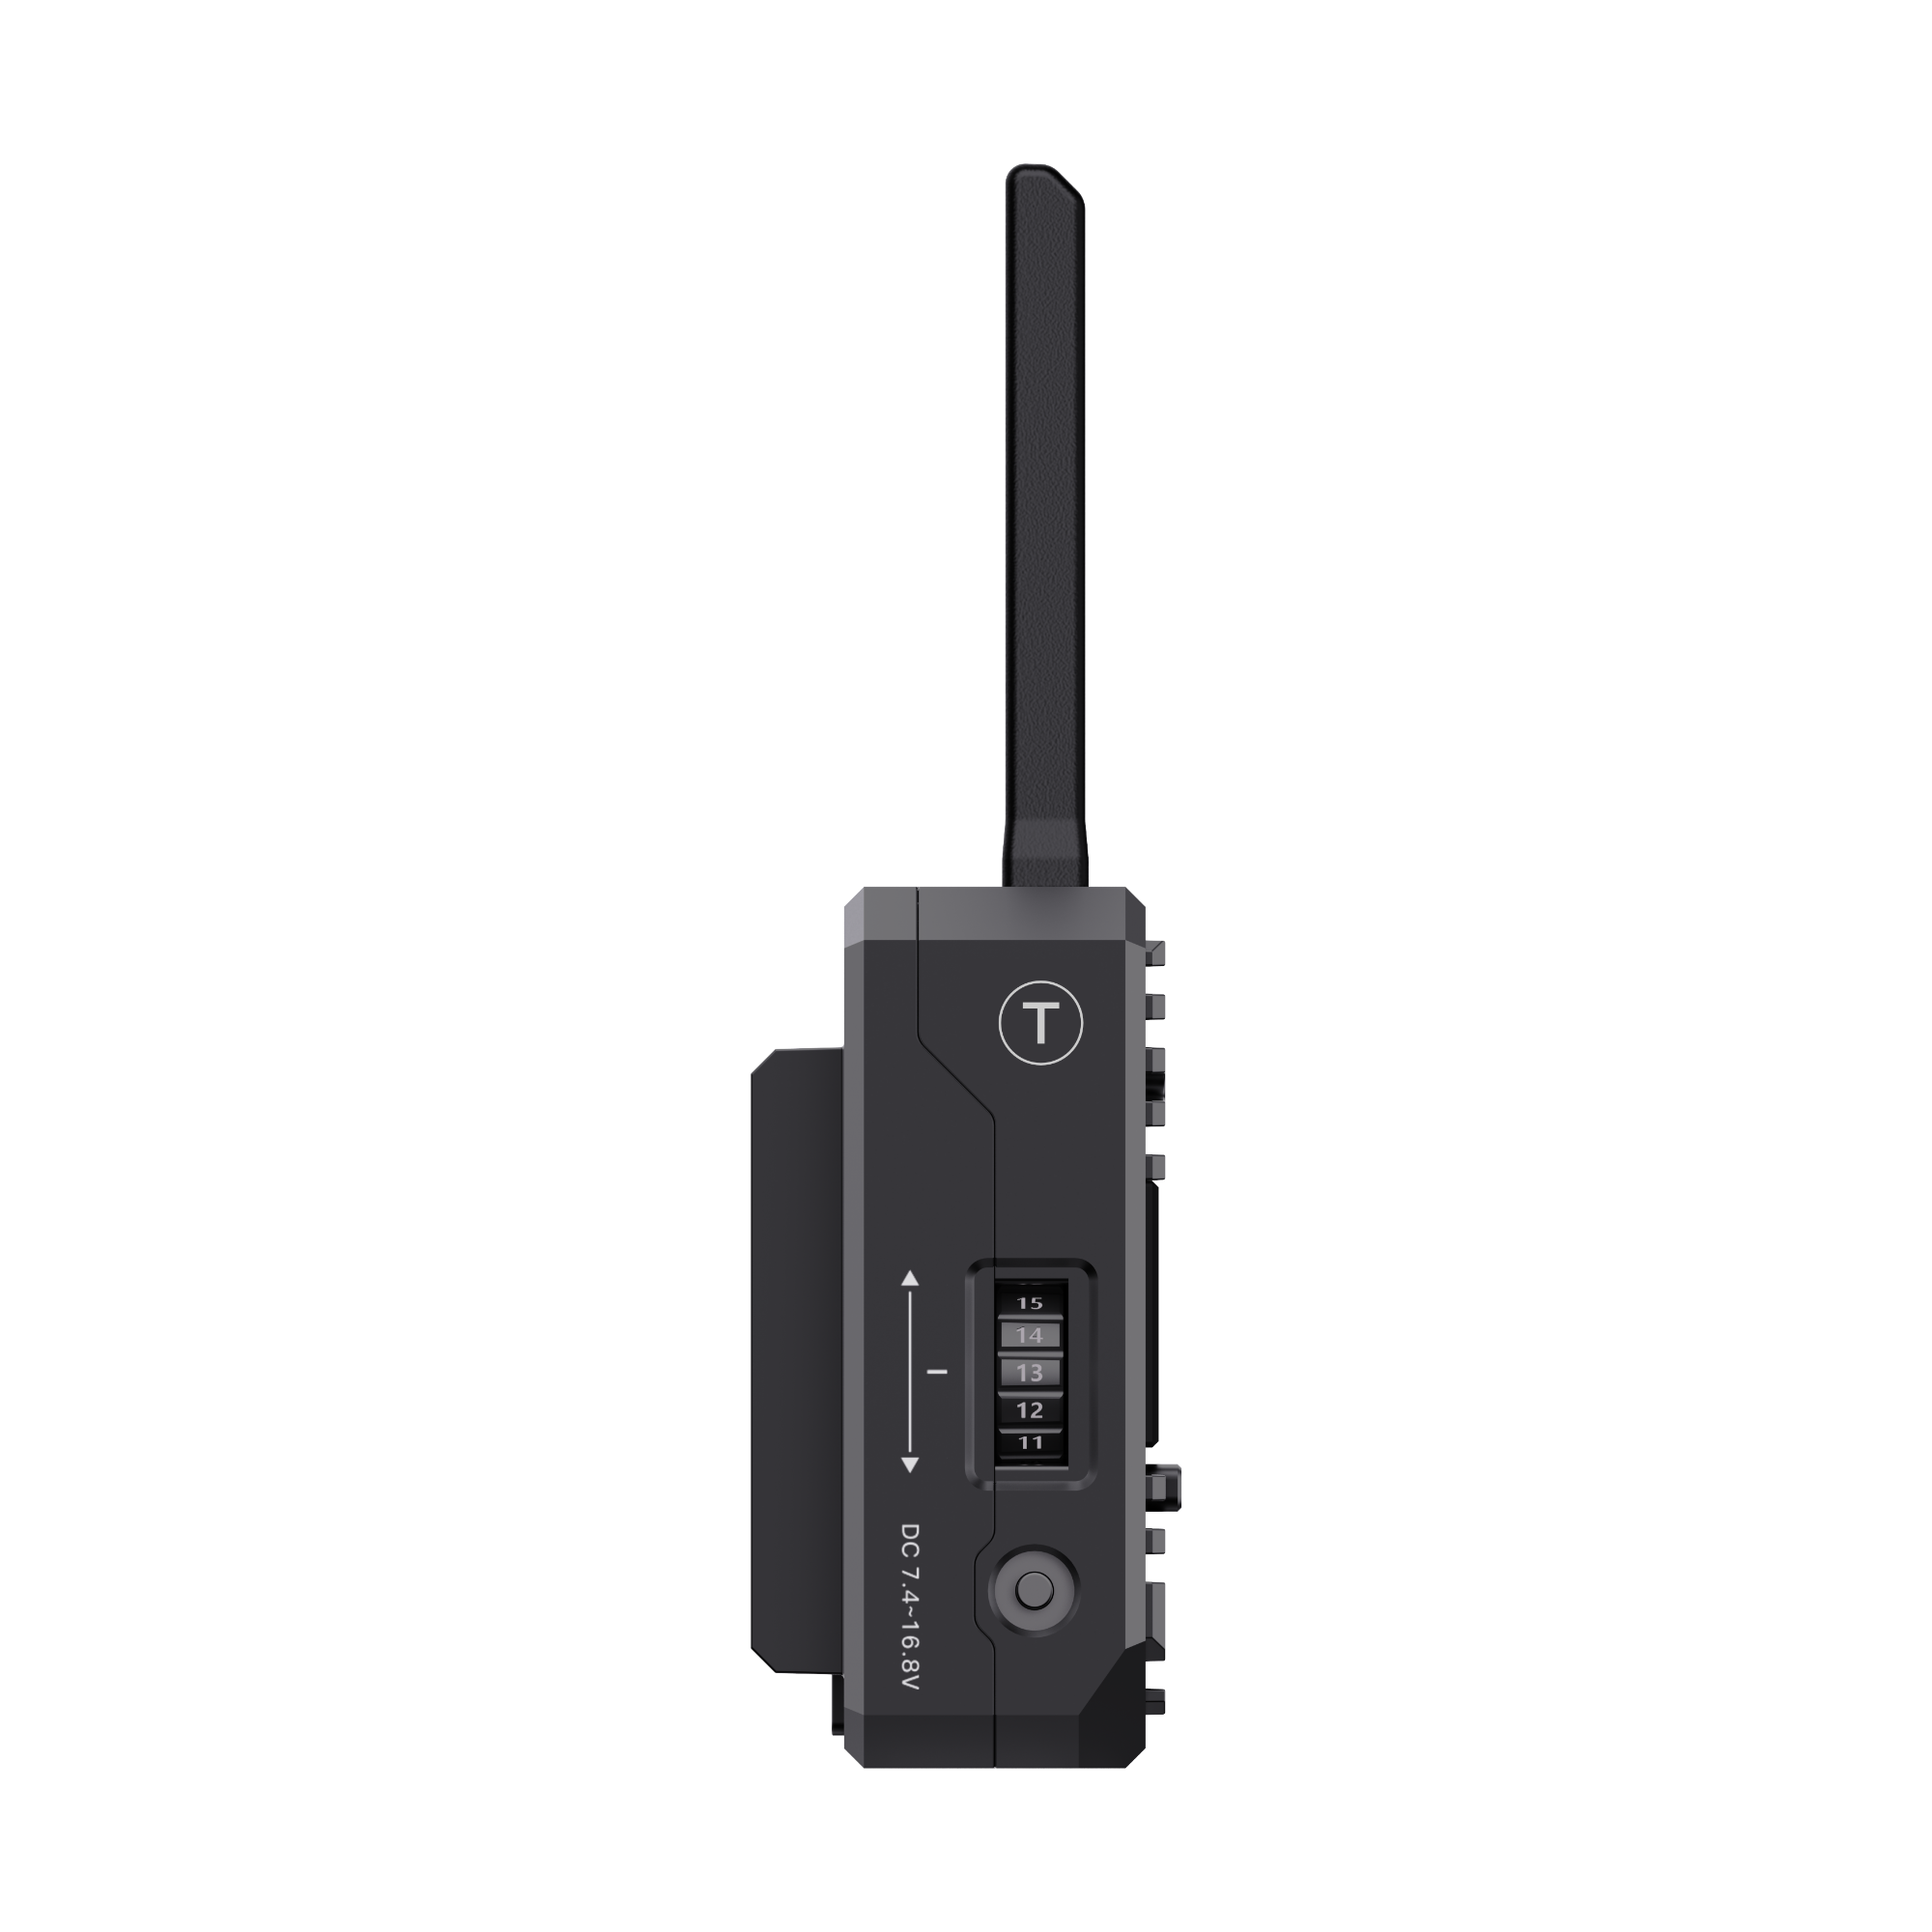 Accsoon CineView Quad - Transmitter & Receiver